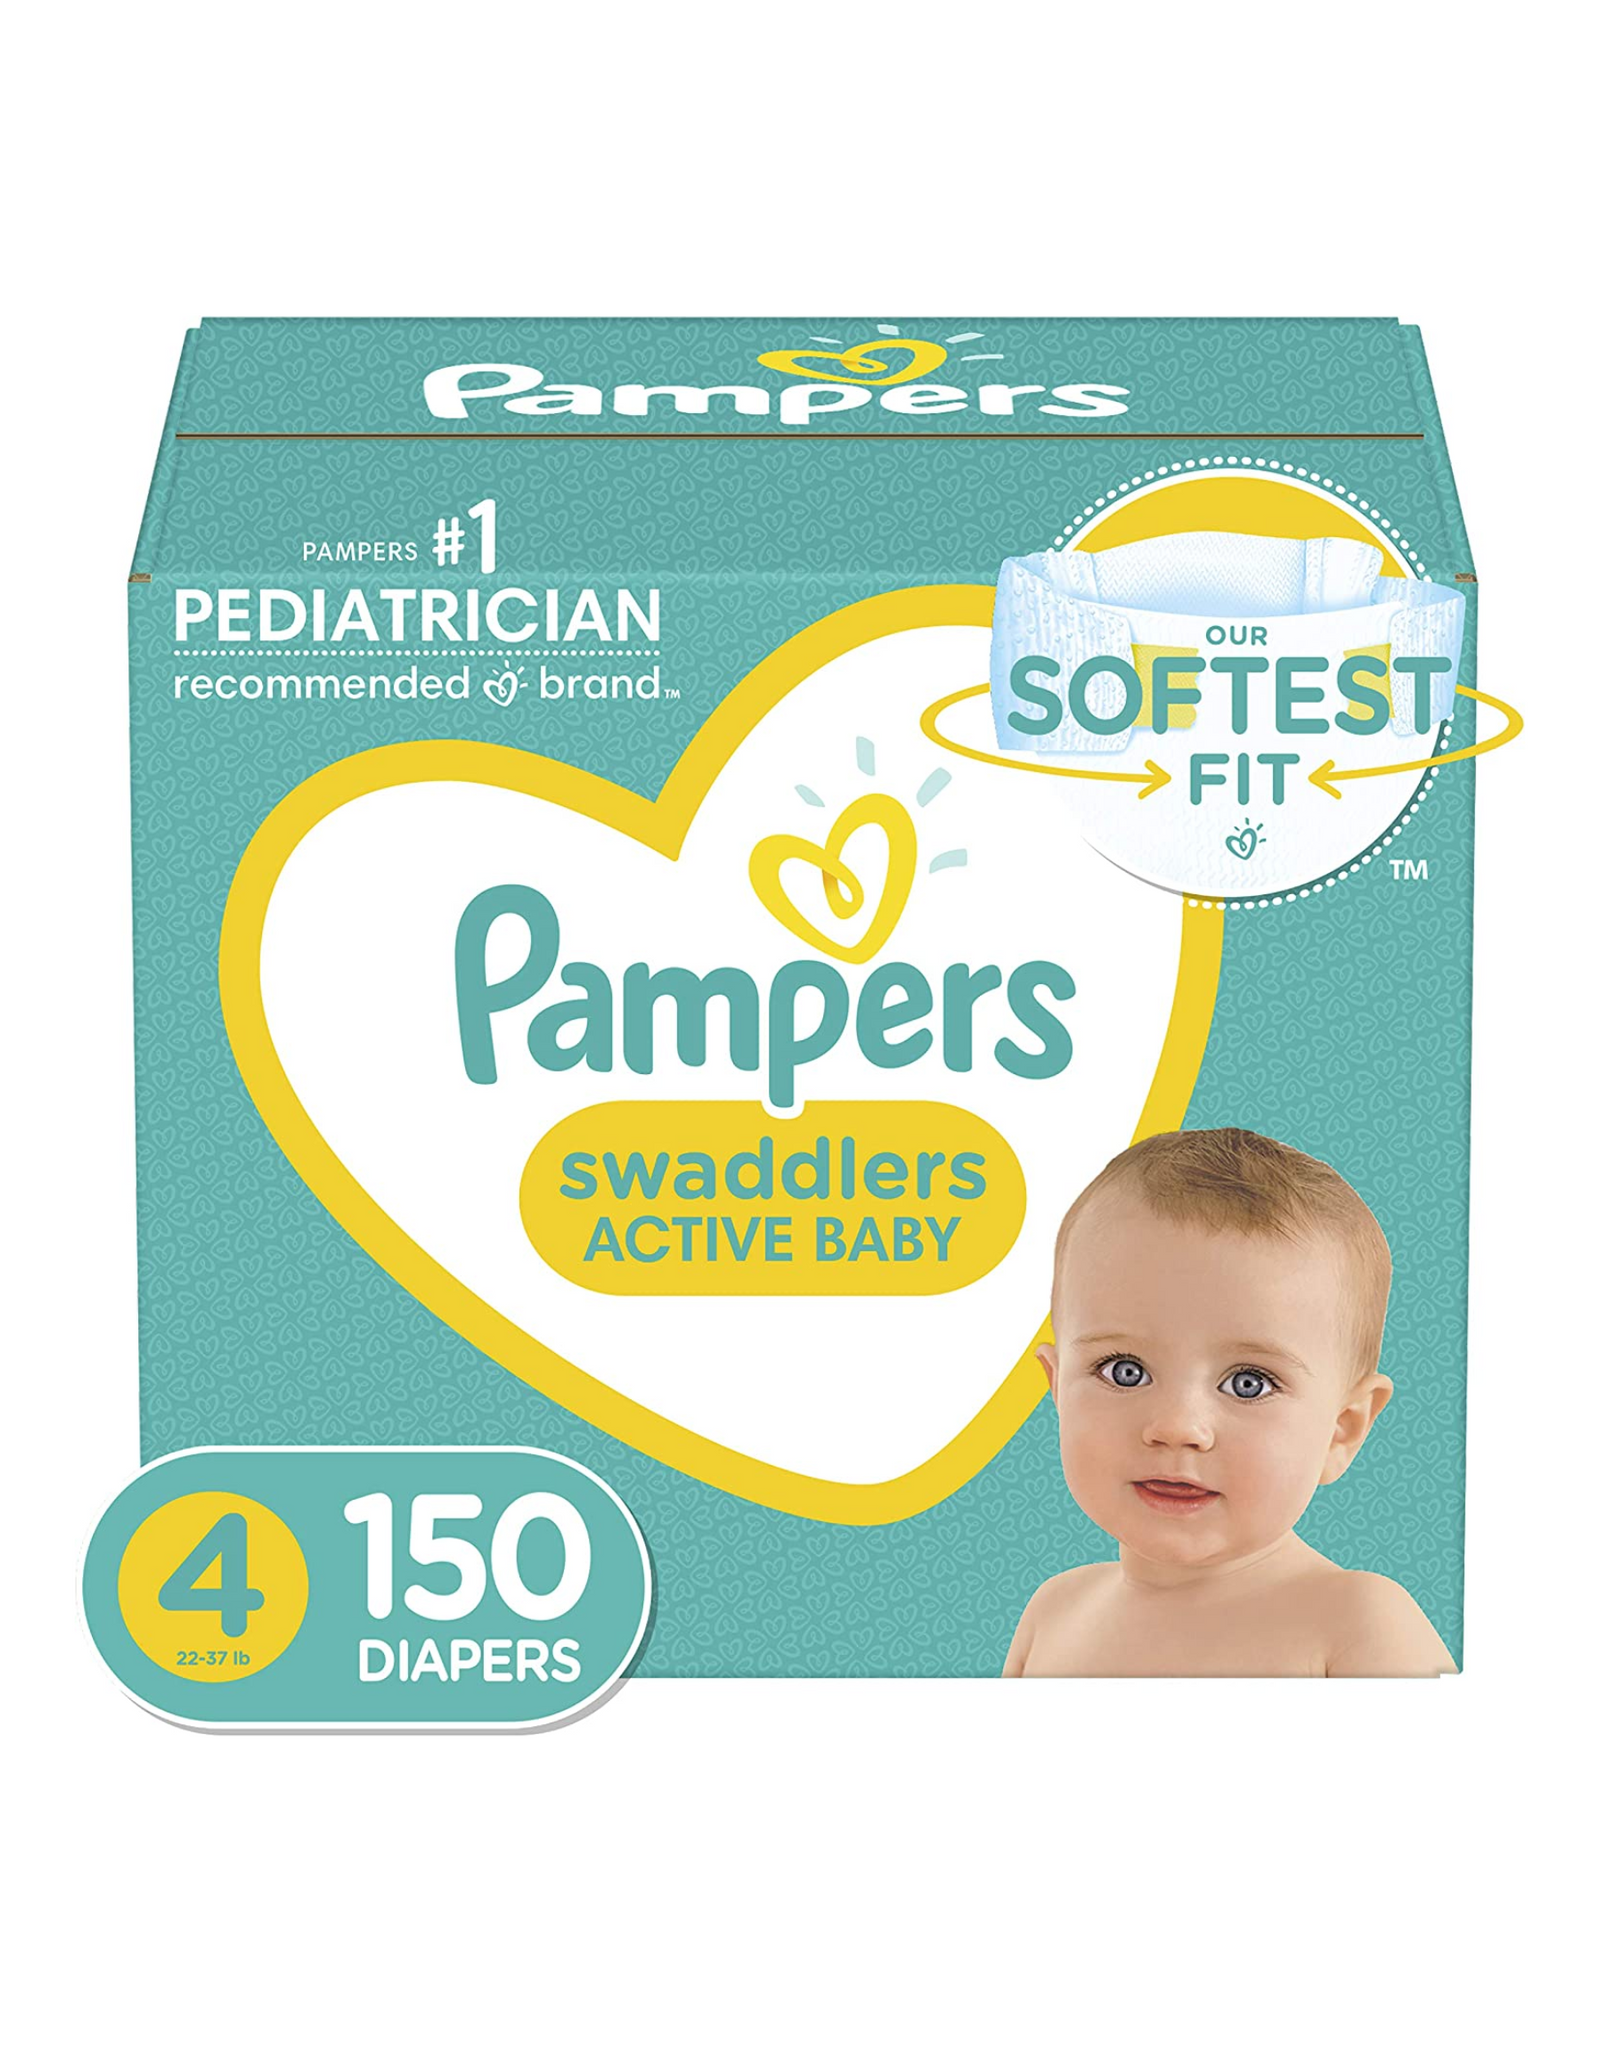 Diapers Size 4, 150 Count - Pampers Swaddlers Active Baby Diapers (Packaging May Vary)